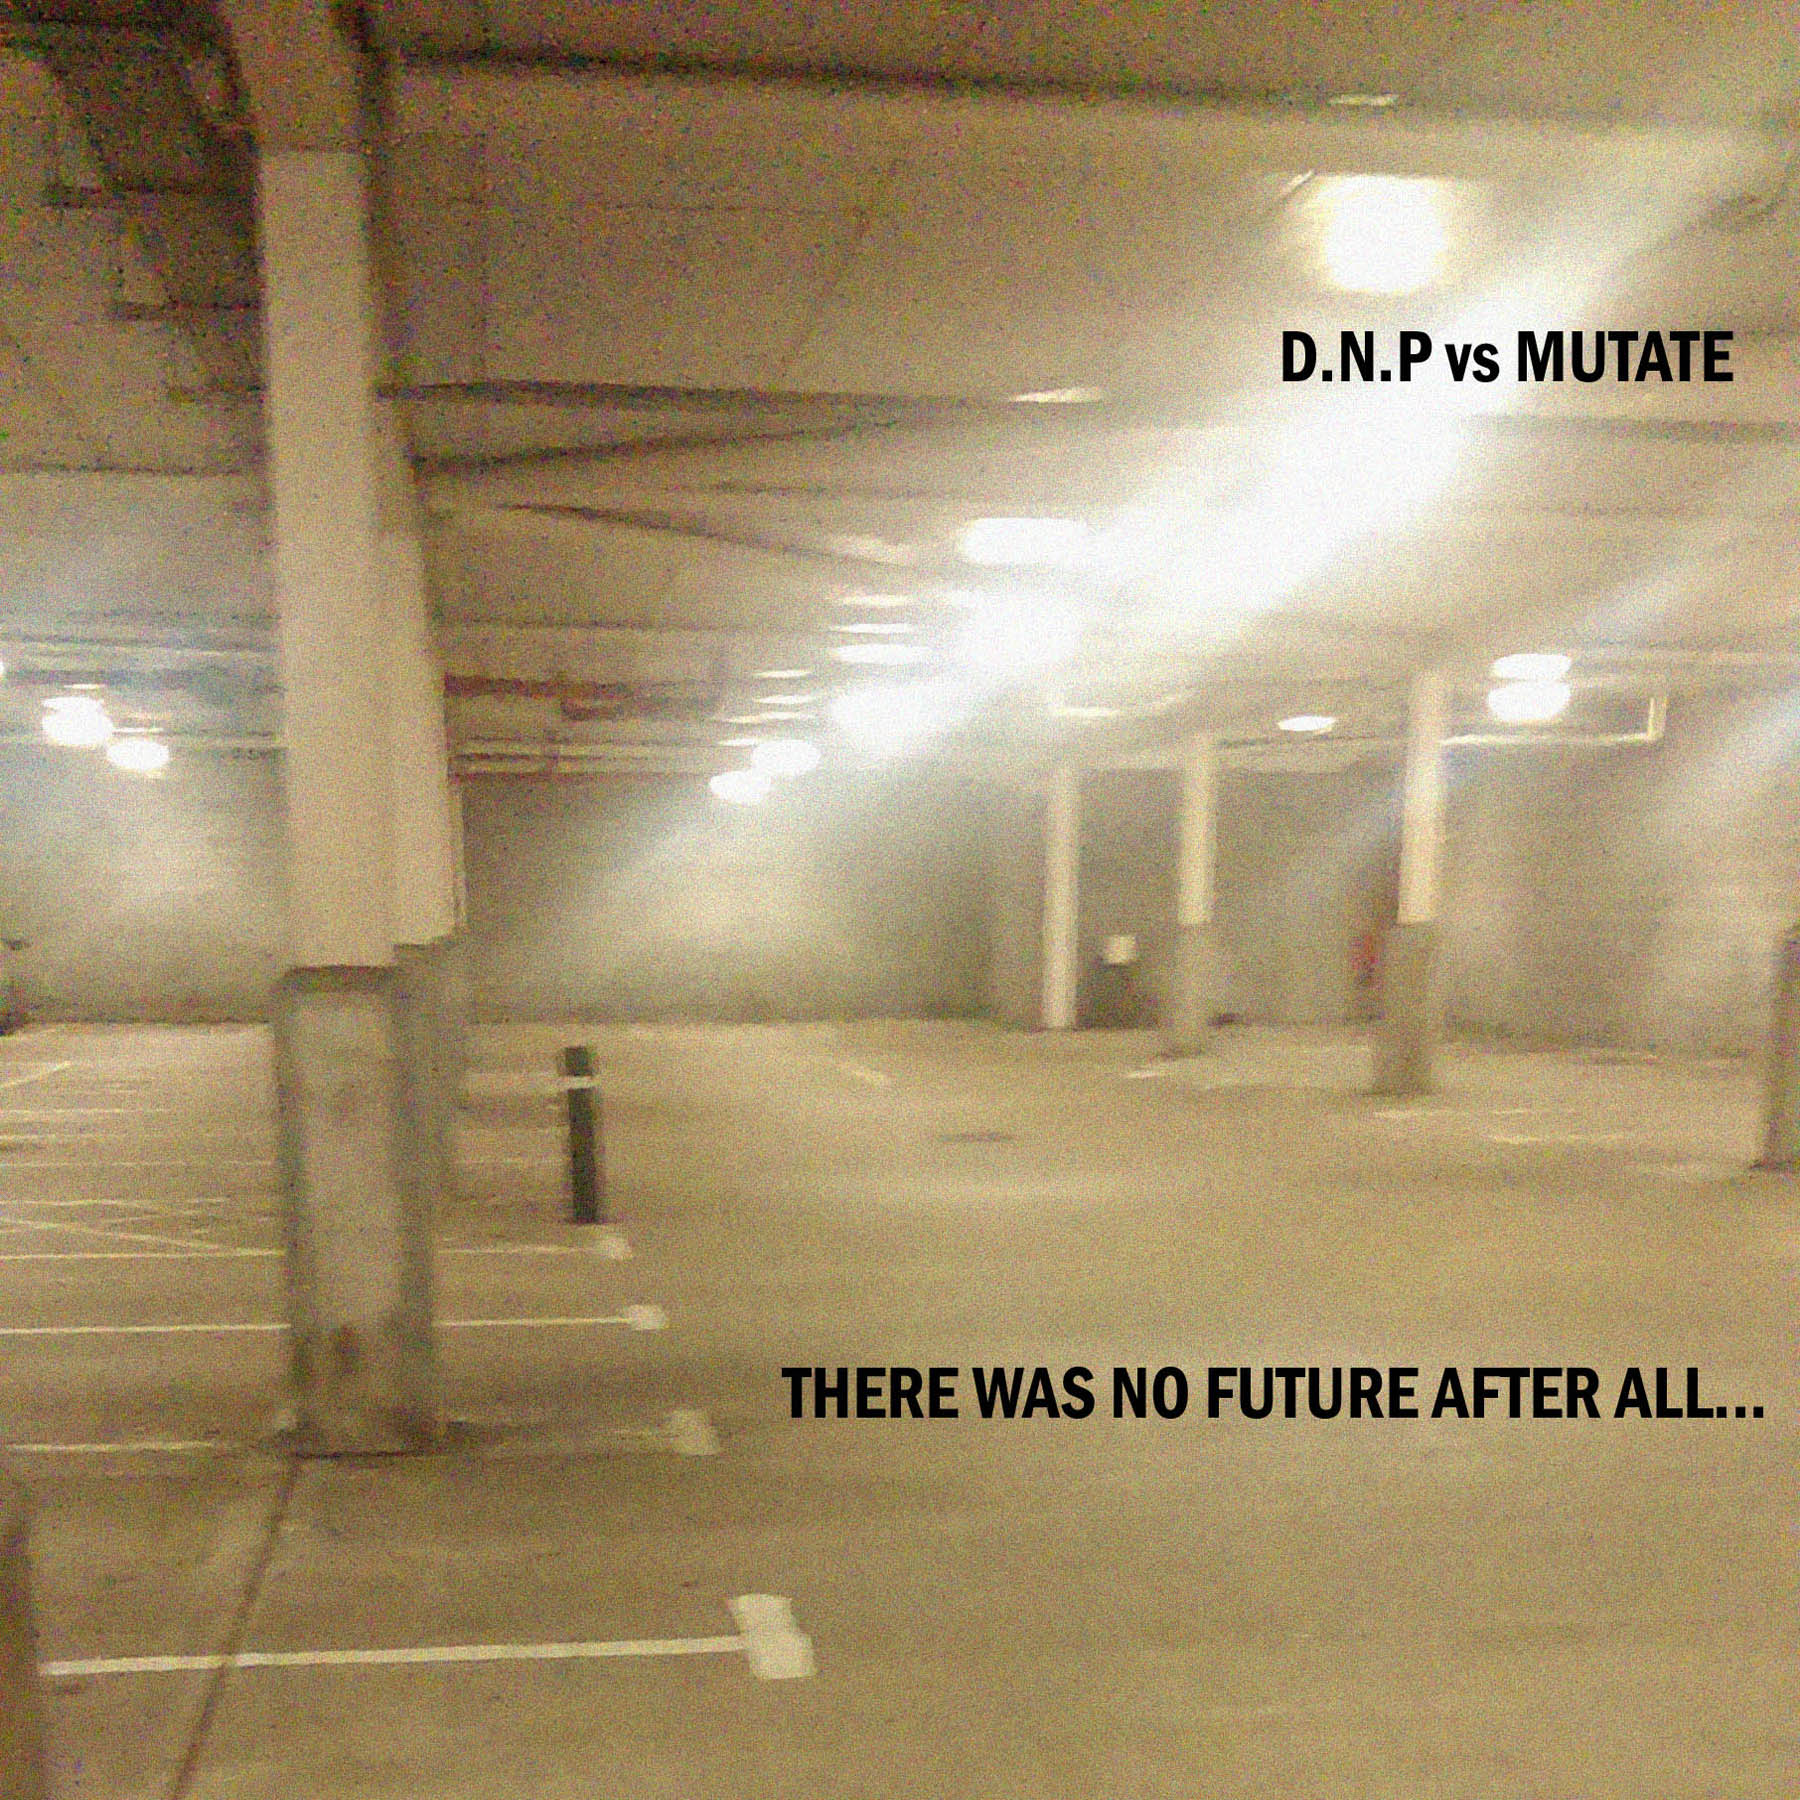 00_-_DNP_vs_Mutate_-_THERE_WAS_NO_FUTURE_AFTER_ALL_-_image